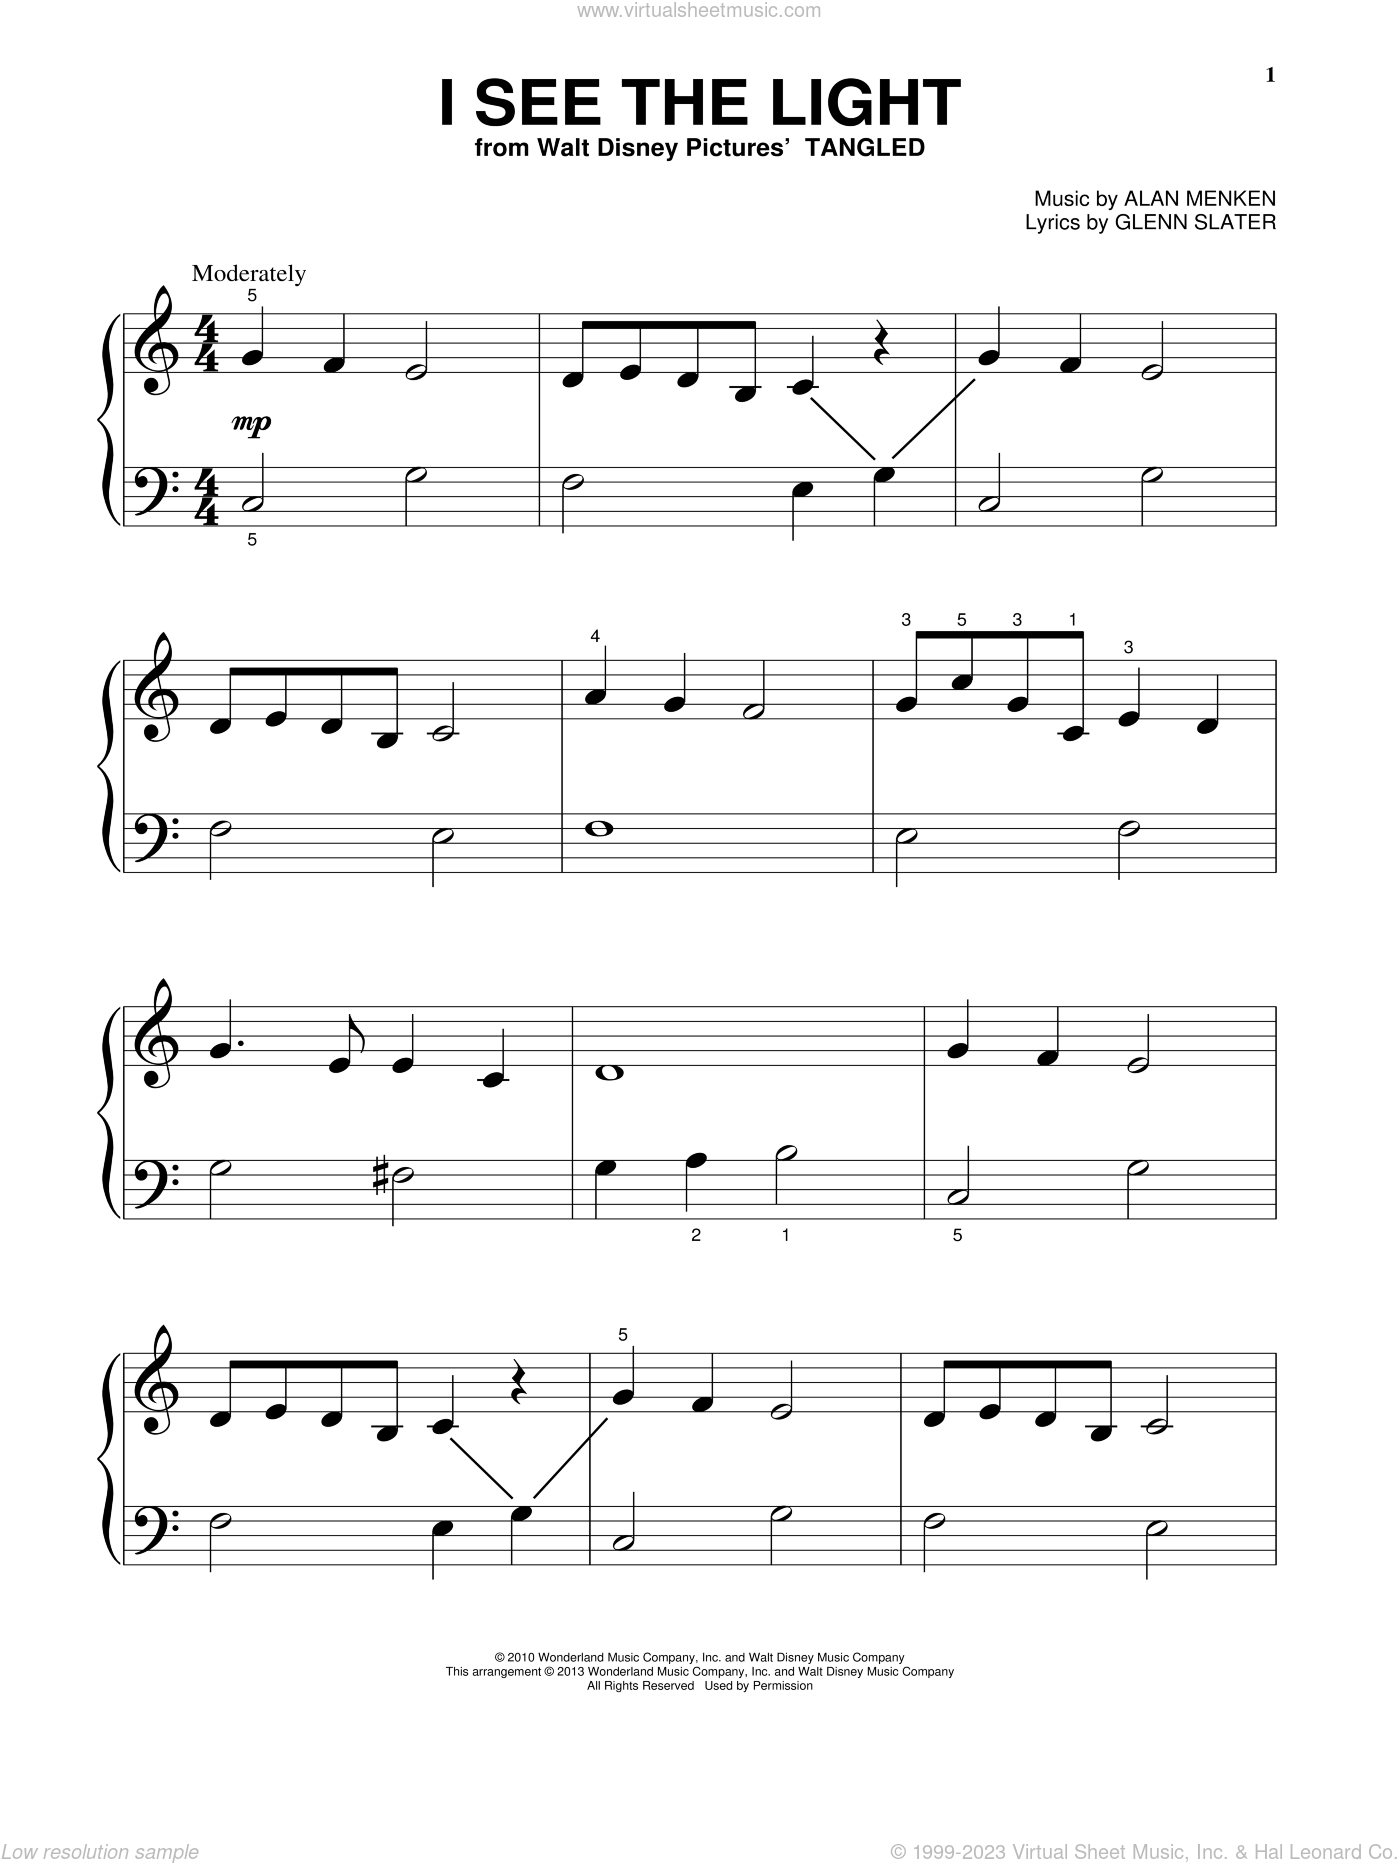 Slater - I See The Light (from Disney's Tangled) sheet music for piano